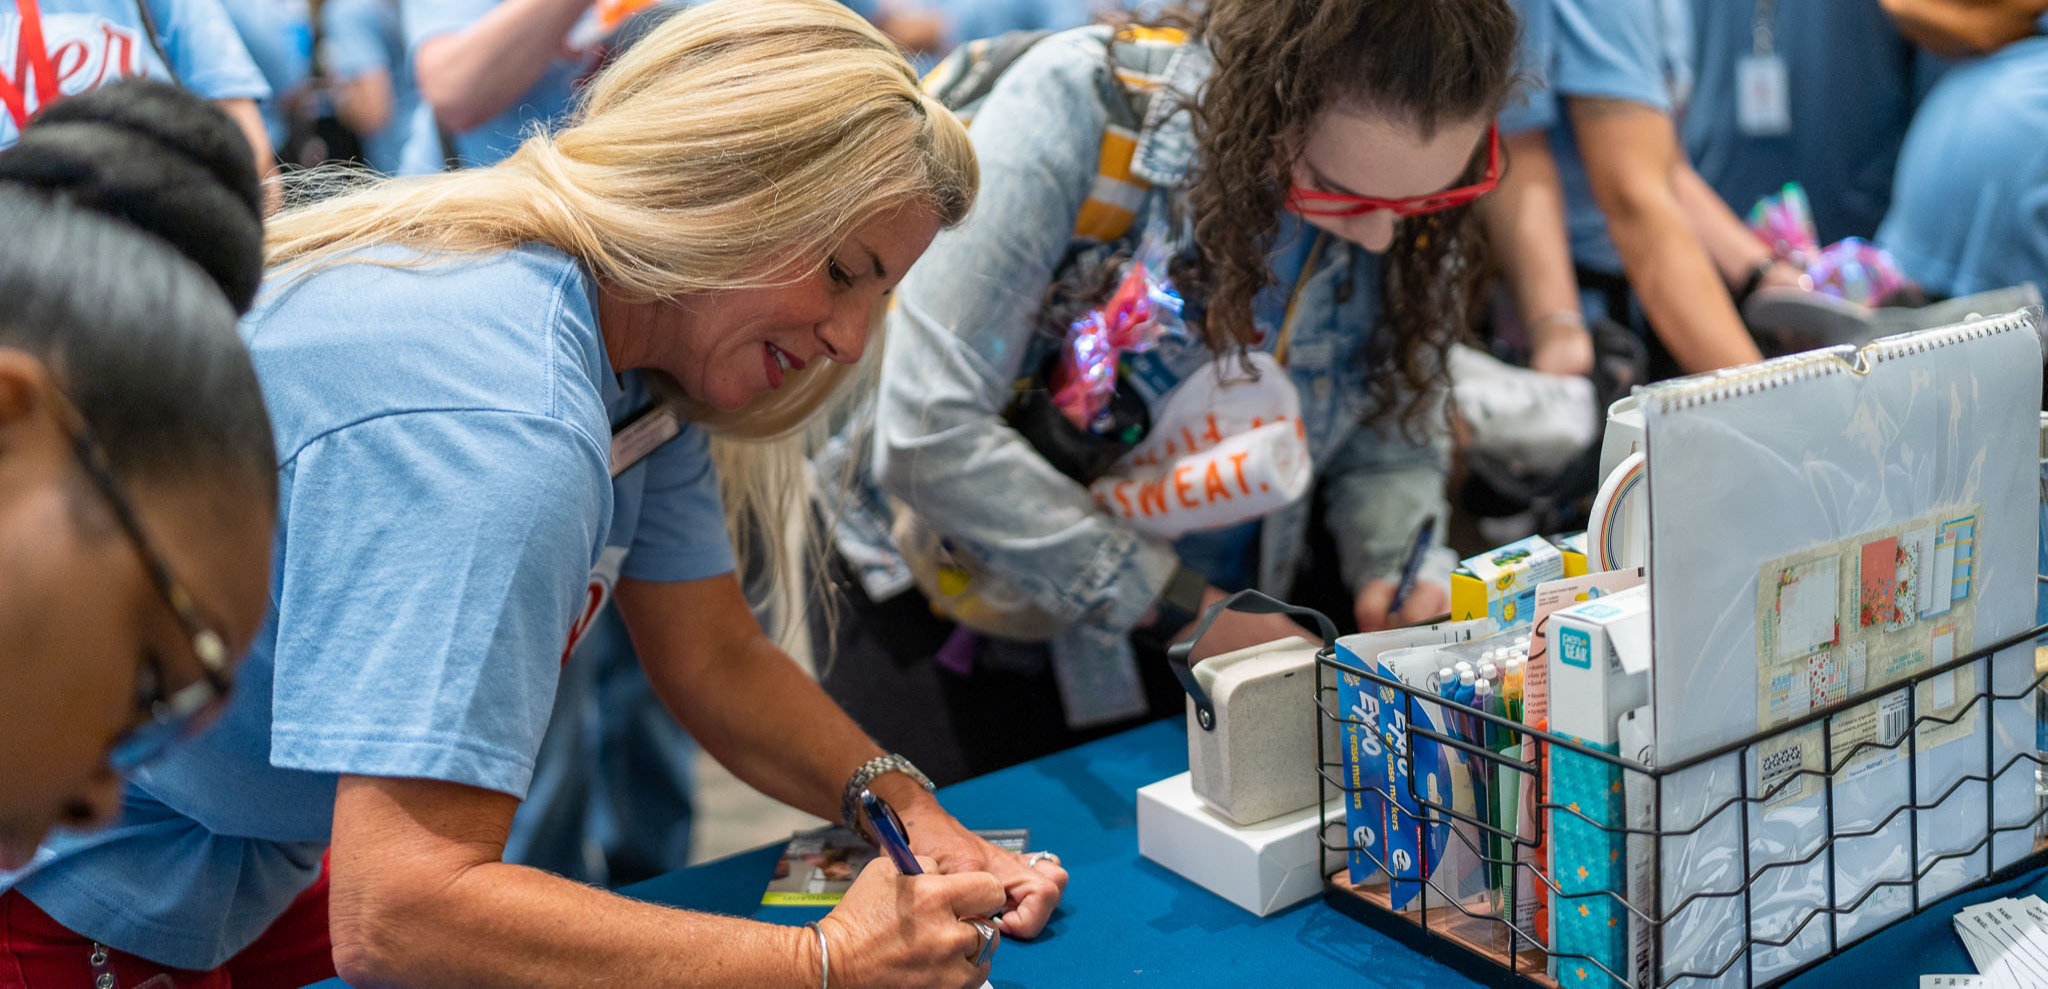 women wearing blue tshirts lean over a table signing cards